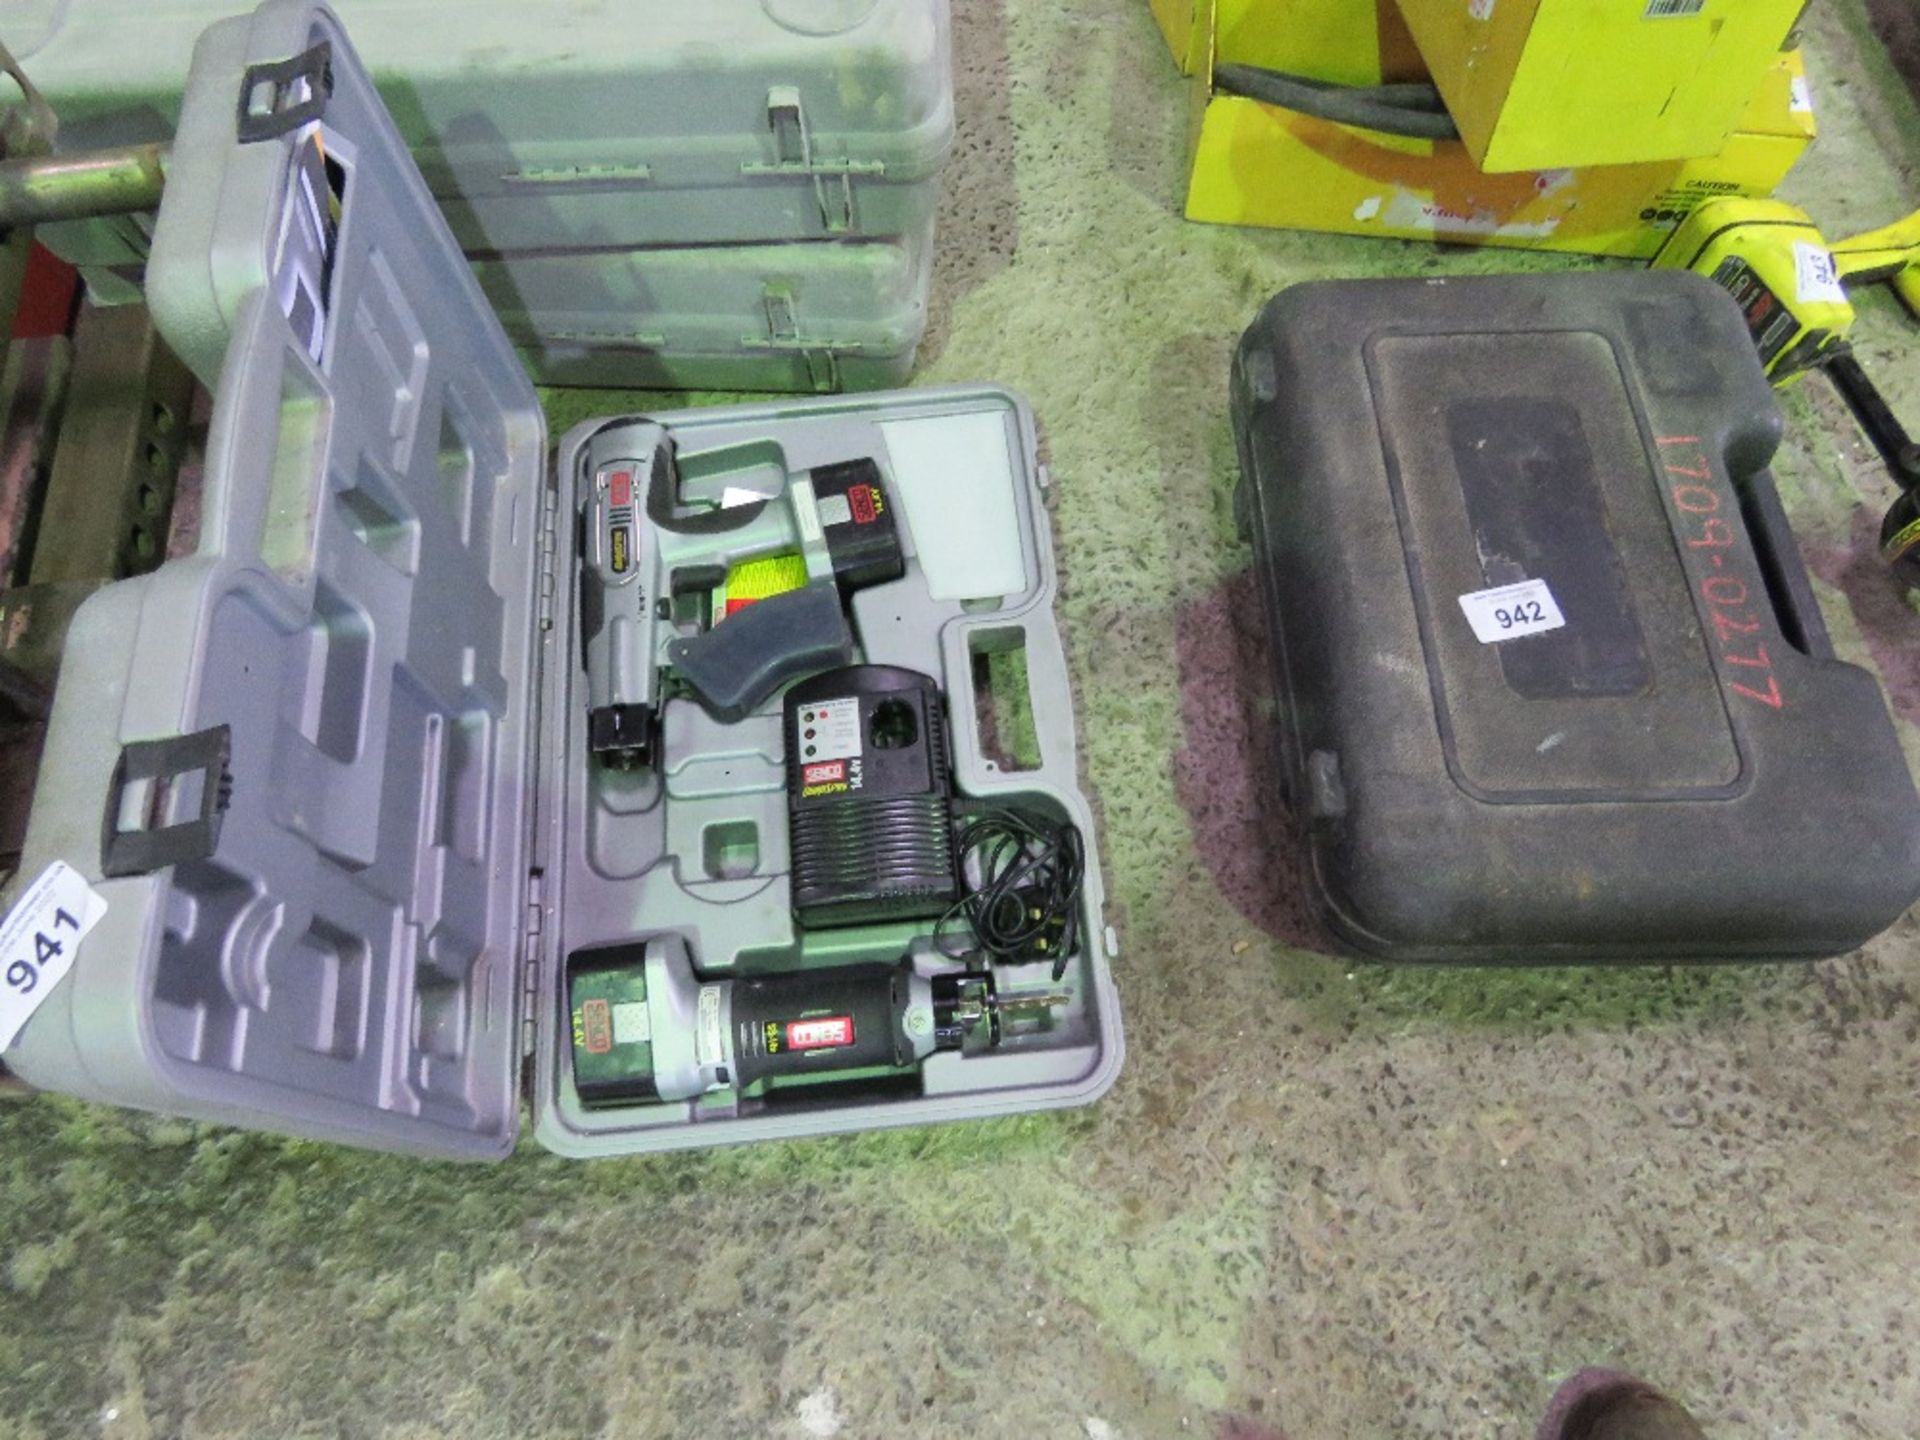 SENCO BATTERY TOOL SET IN A BOX. - Image 4 of 4